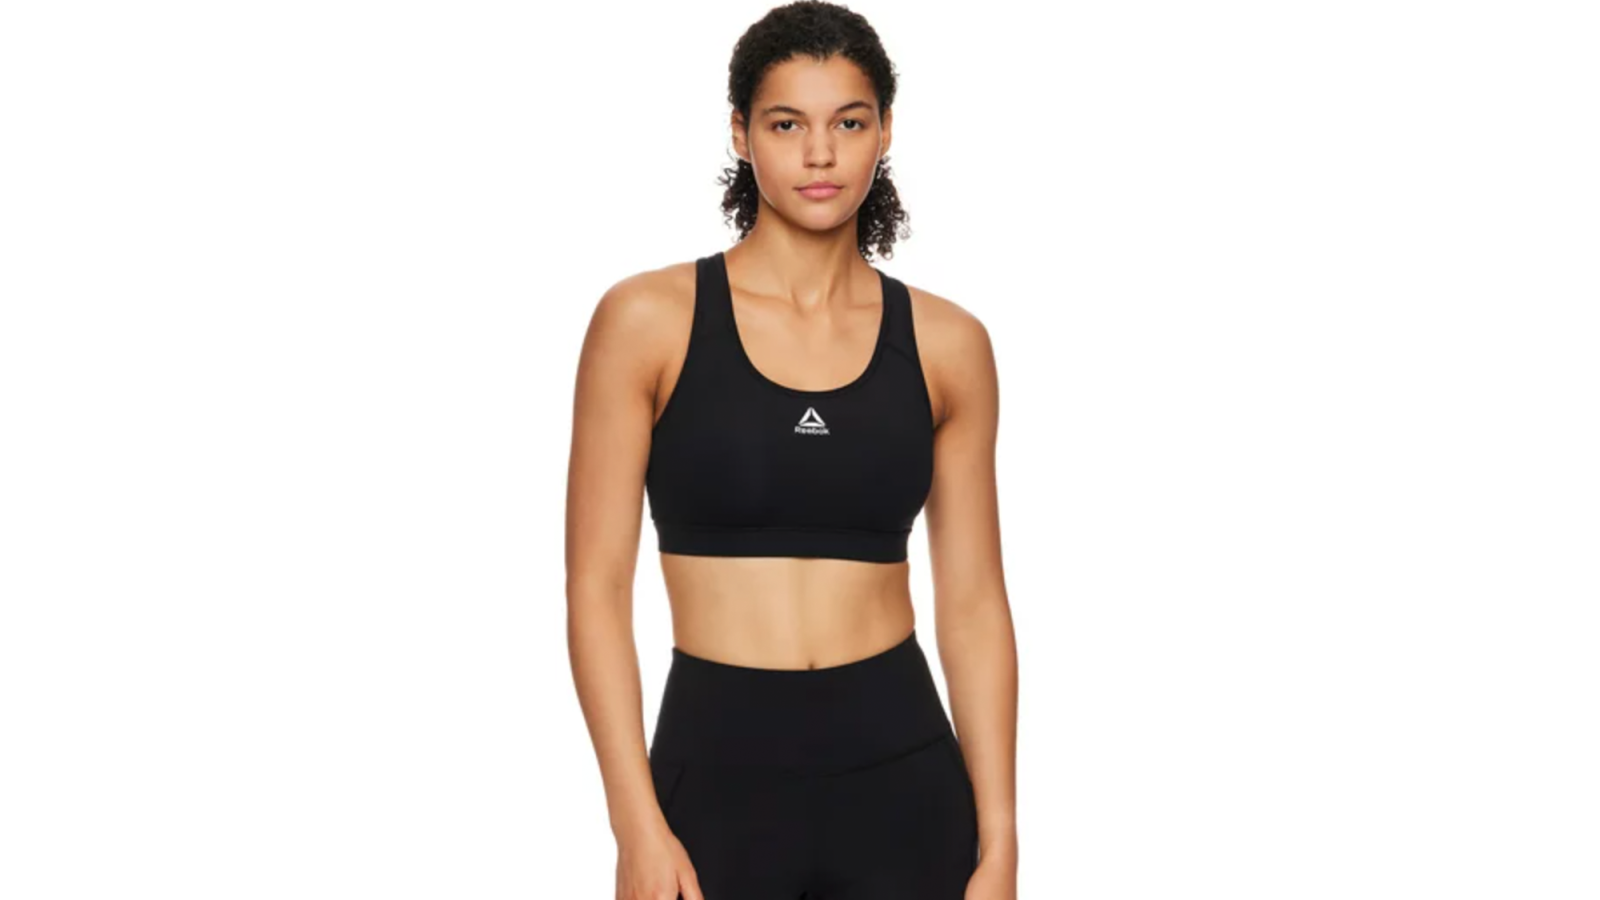 Reebok Women's Stronger Sports Bra with Mesh Panel and Removable Cups